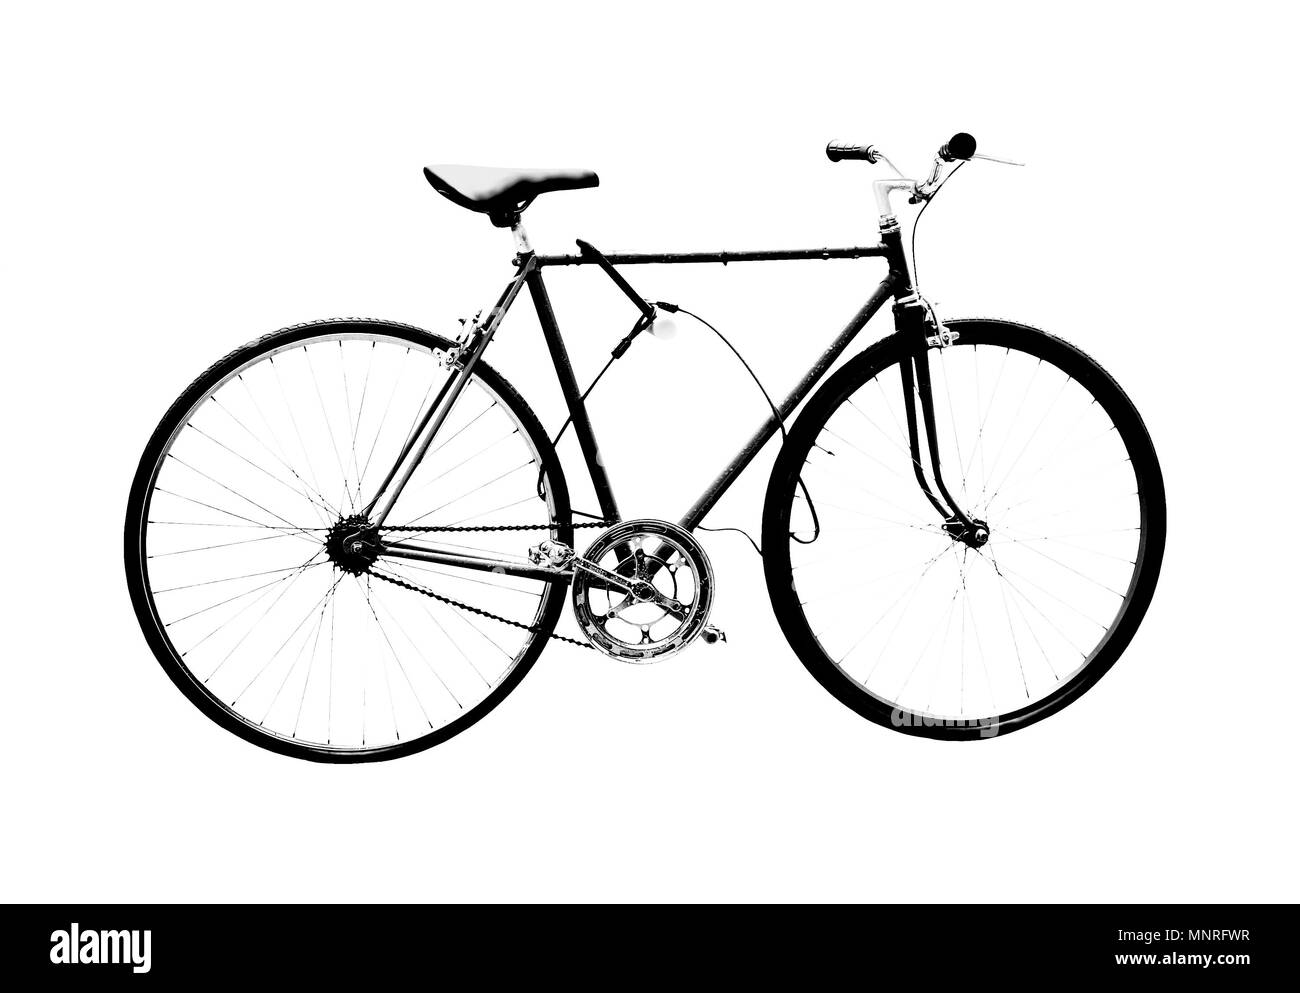 Classic vintage style bicycle for men black and white image isolated on white Stock Photo